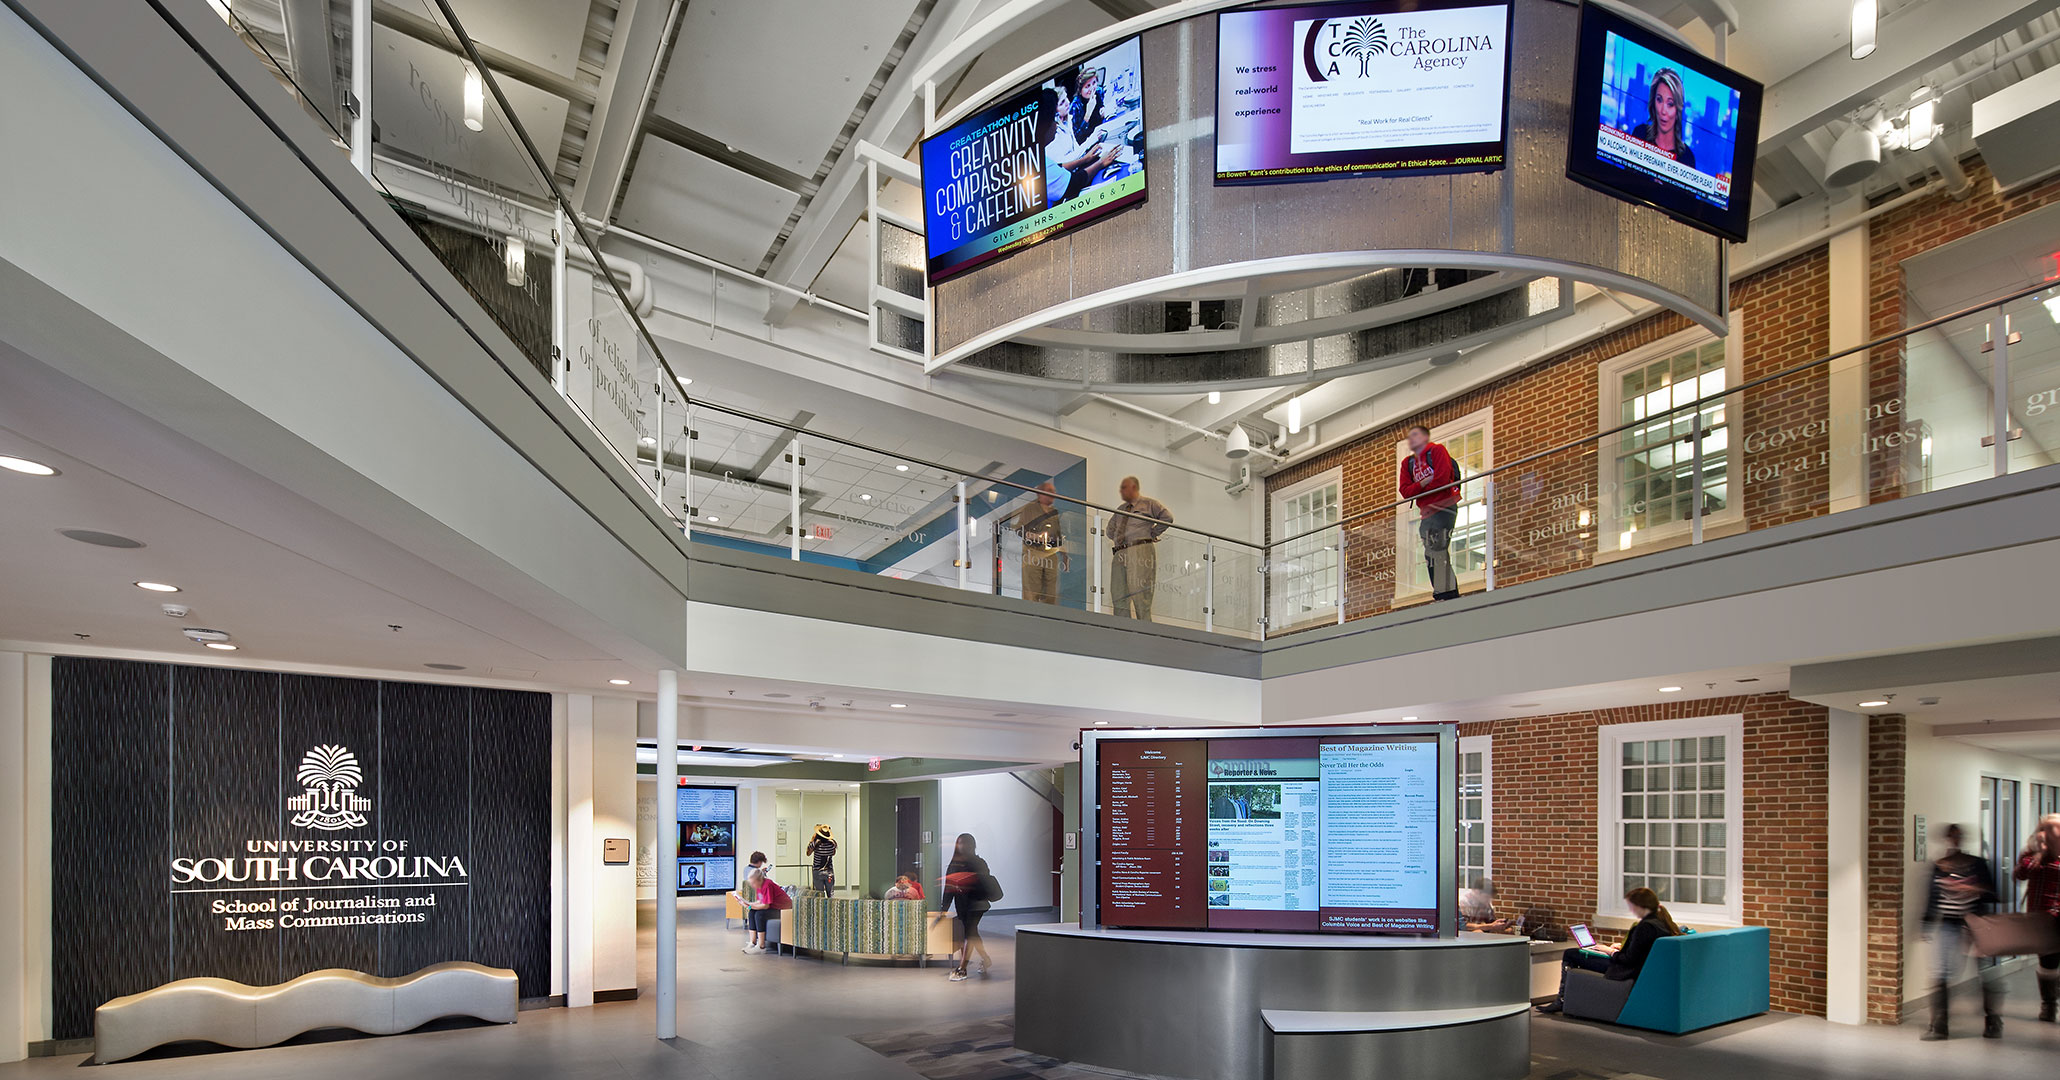 University of South Carolina worked with Boudreaux architects to design and upgrade the interior and exterior of the School of Journalism.